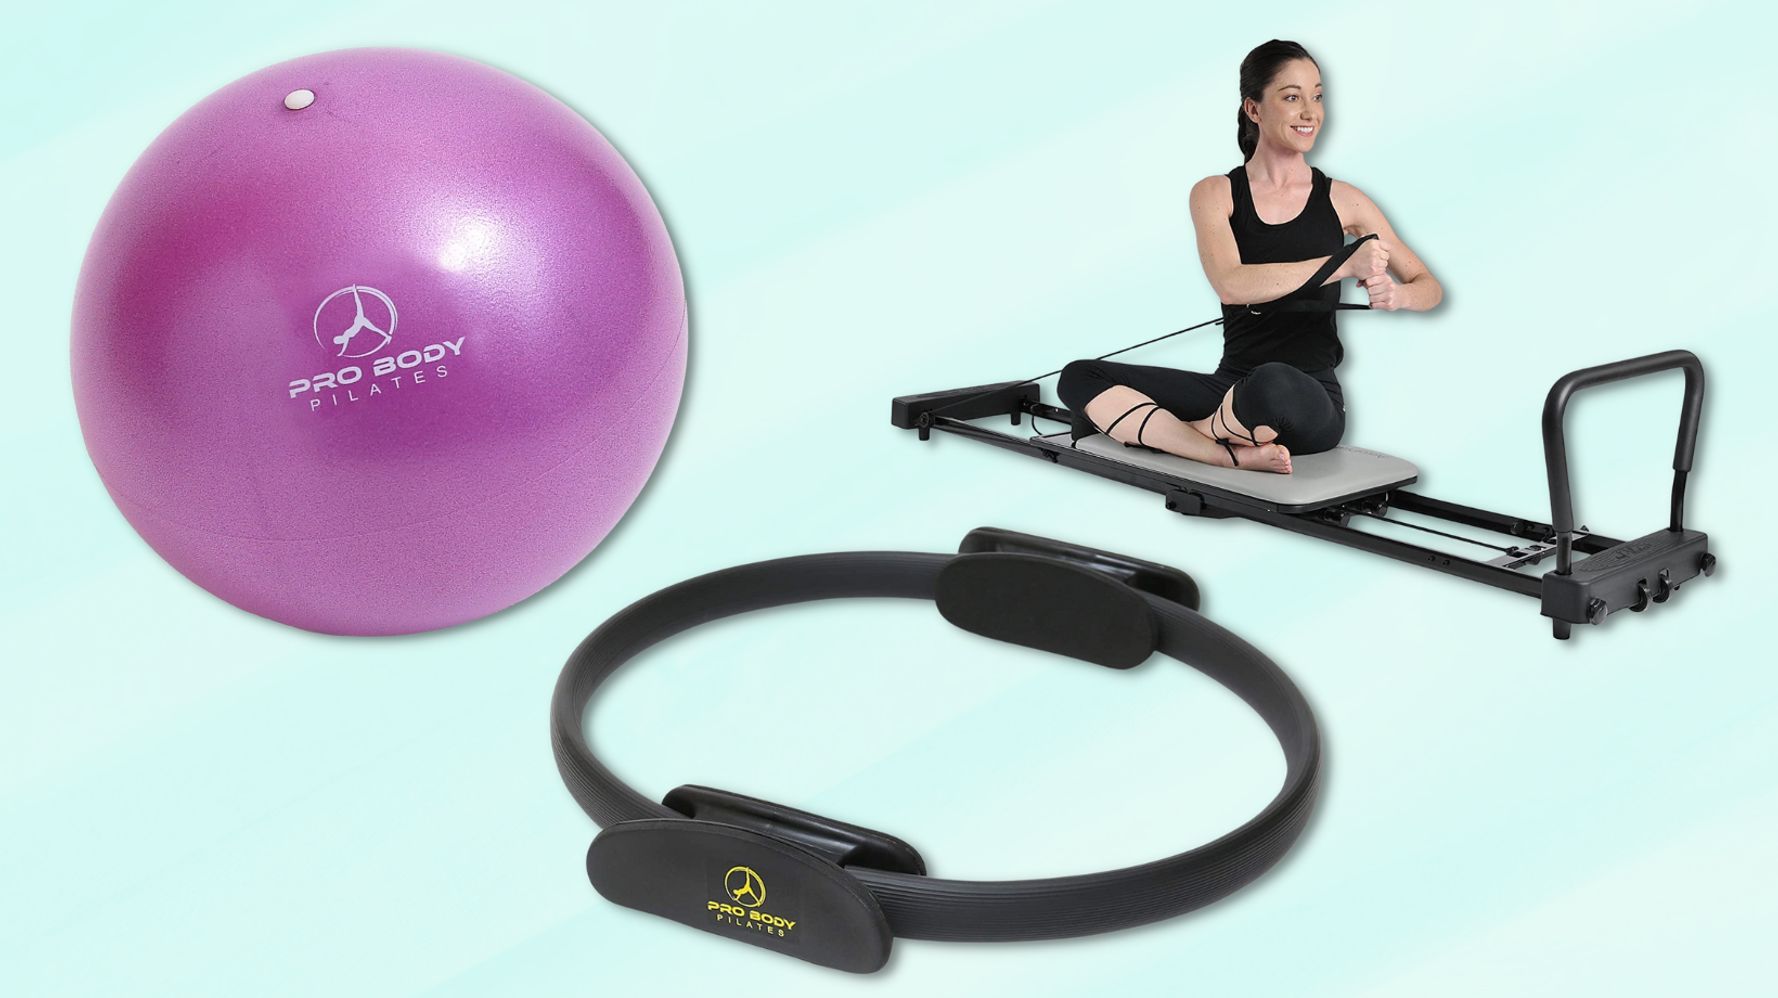 Pilates Equipment Review: Choosing the Best for Your Workout